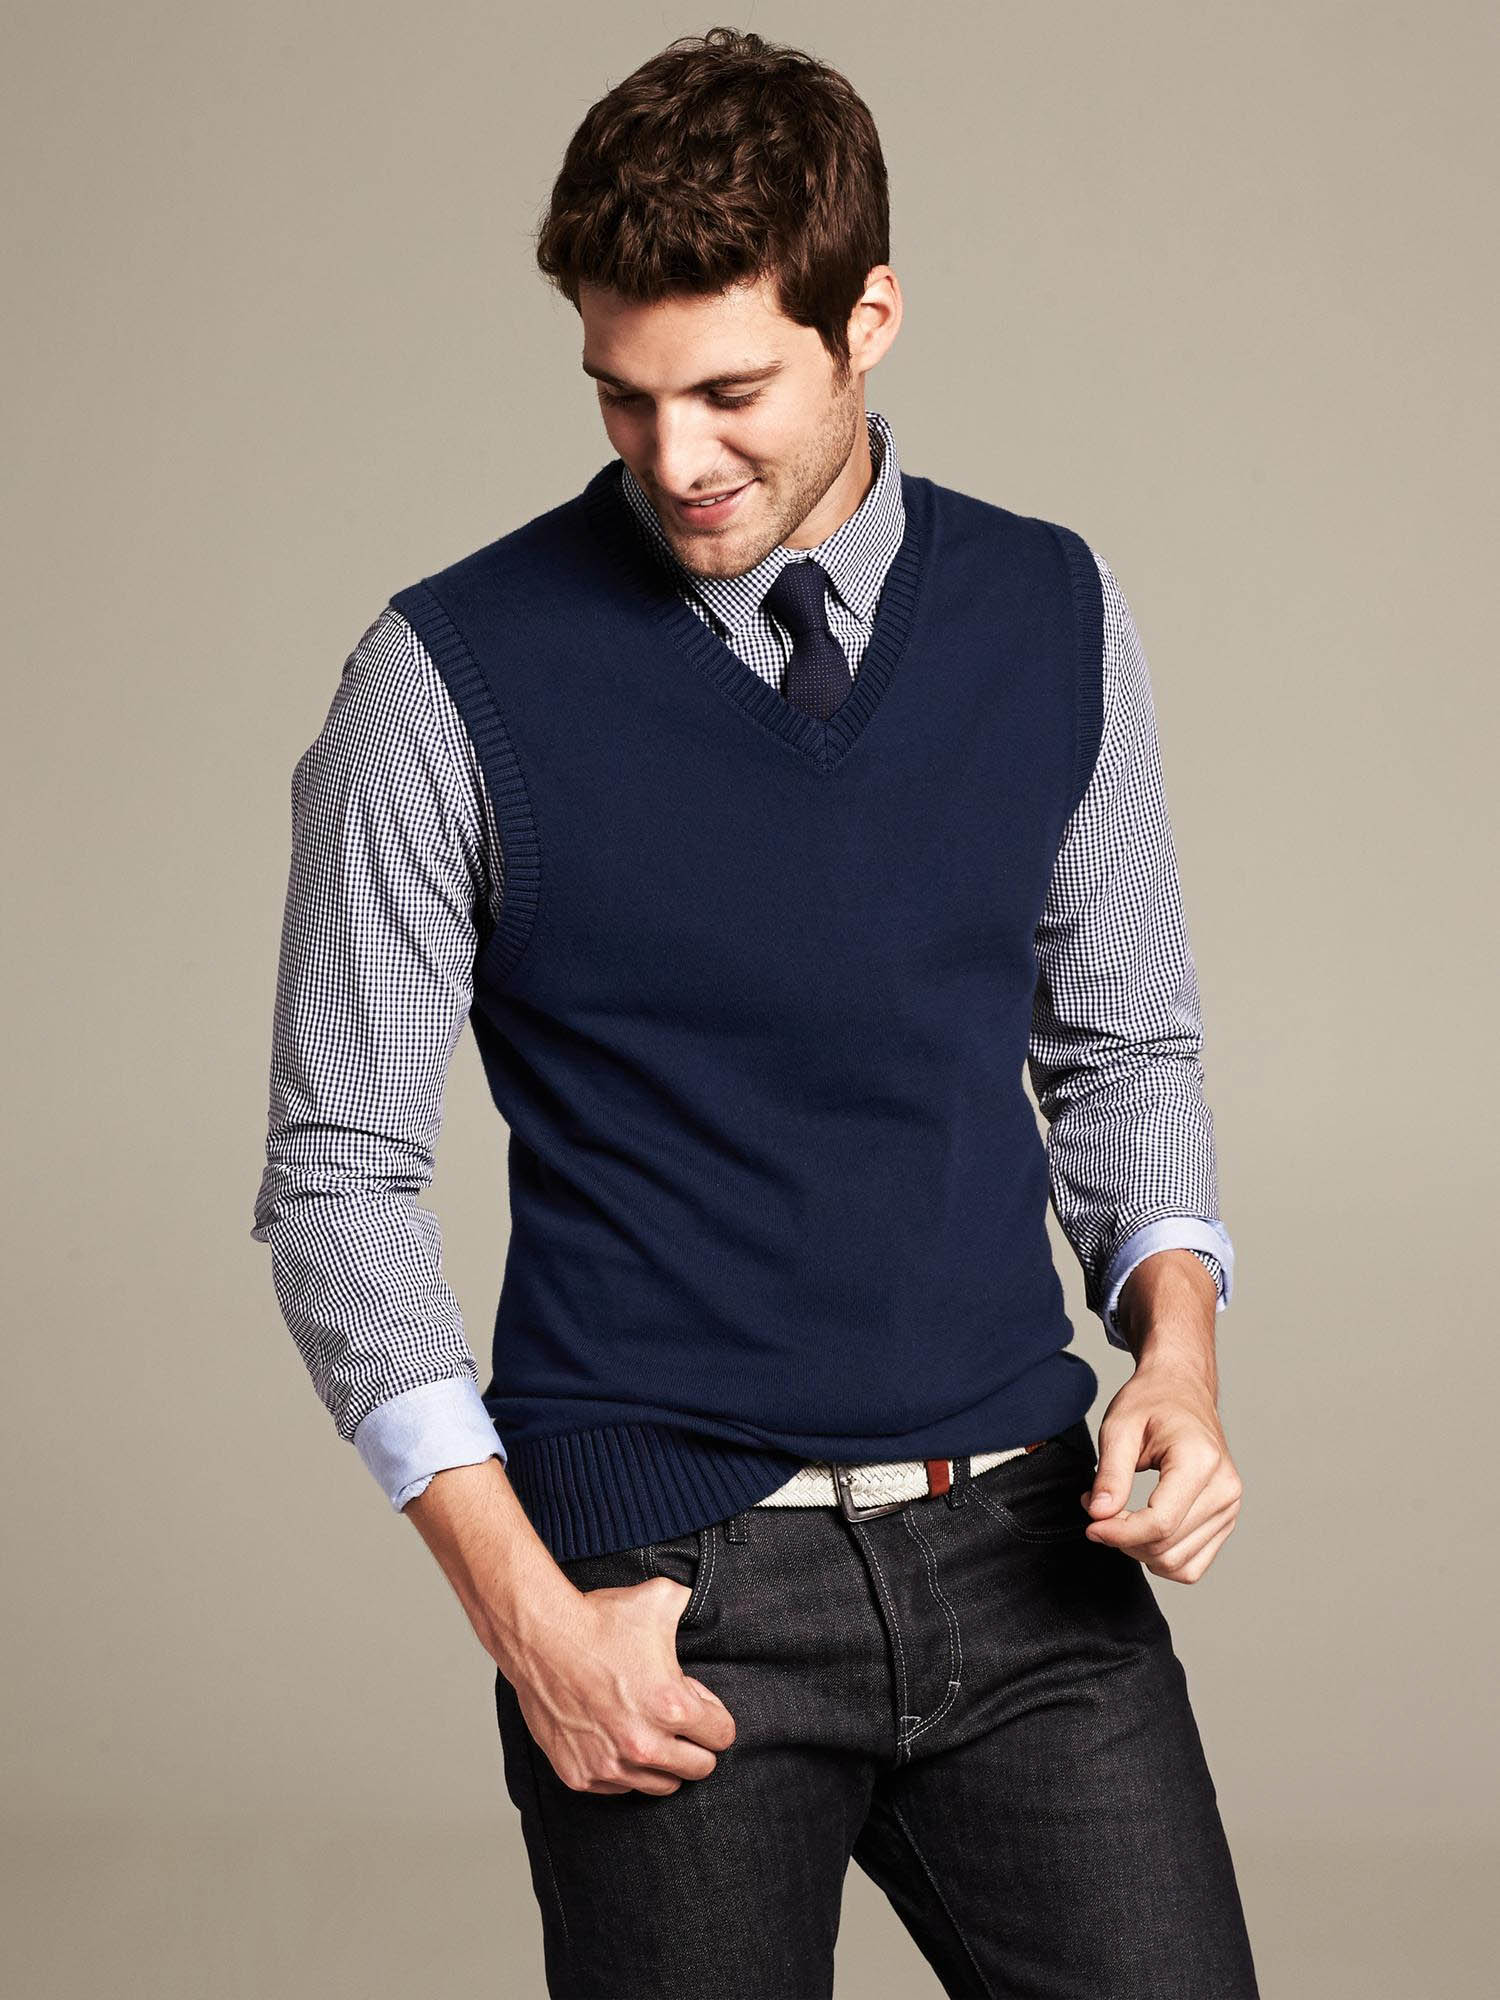 Fall Outfits for Men: 40+ Casual Fall Outfit Ideas for Guys